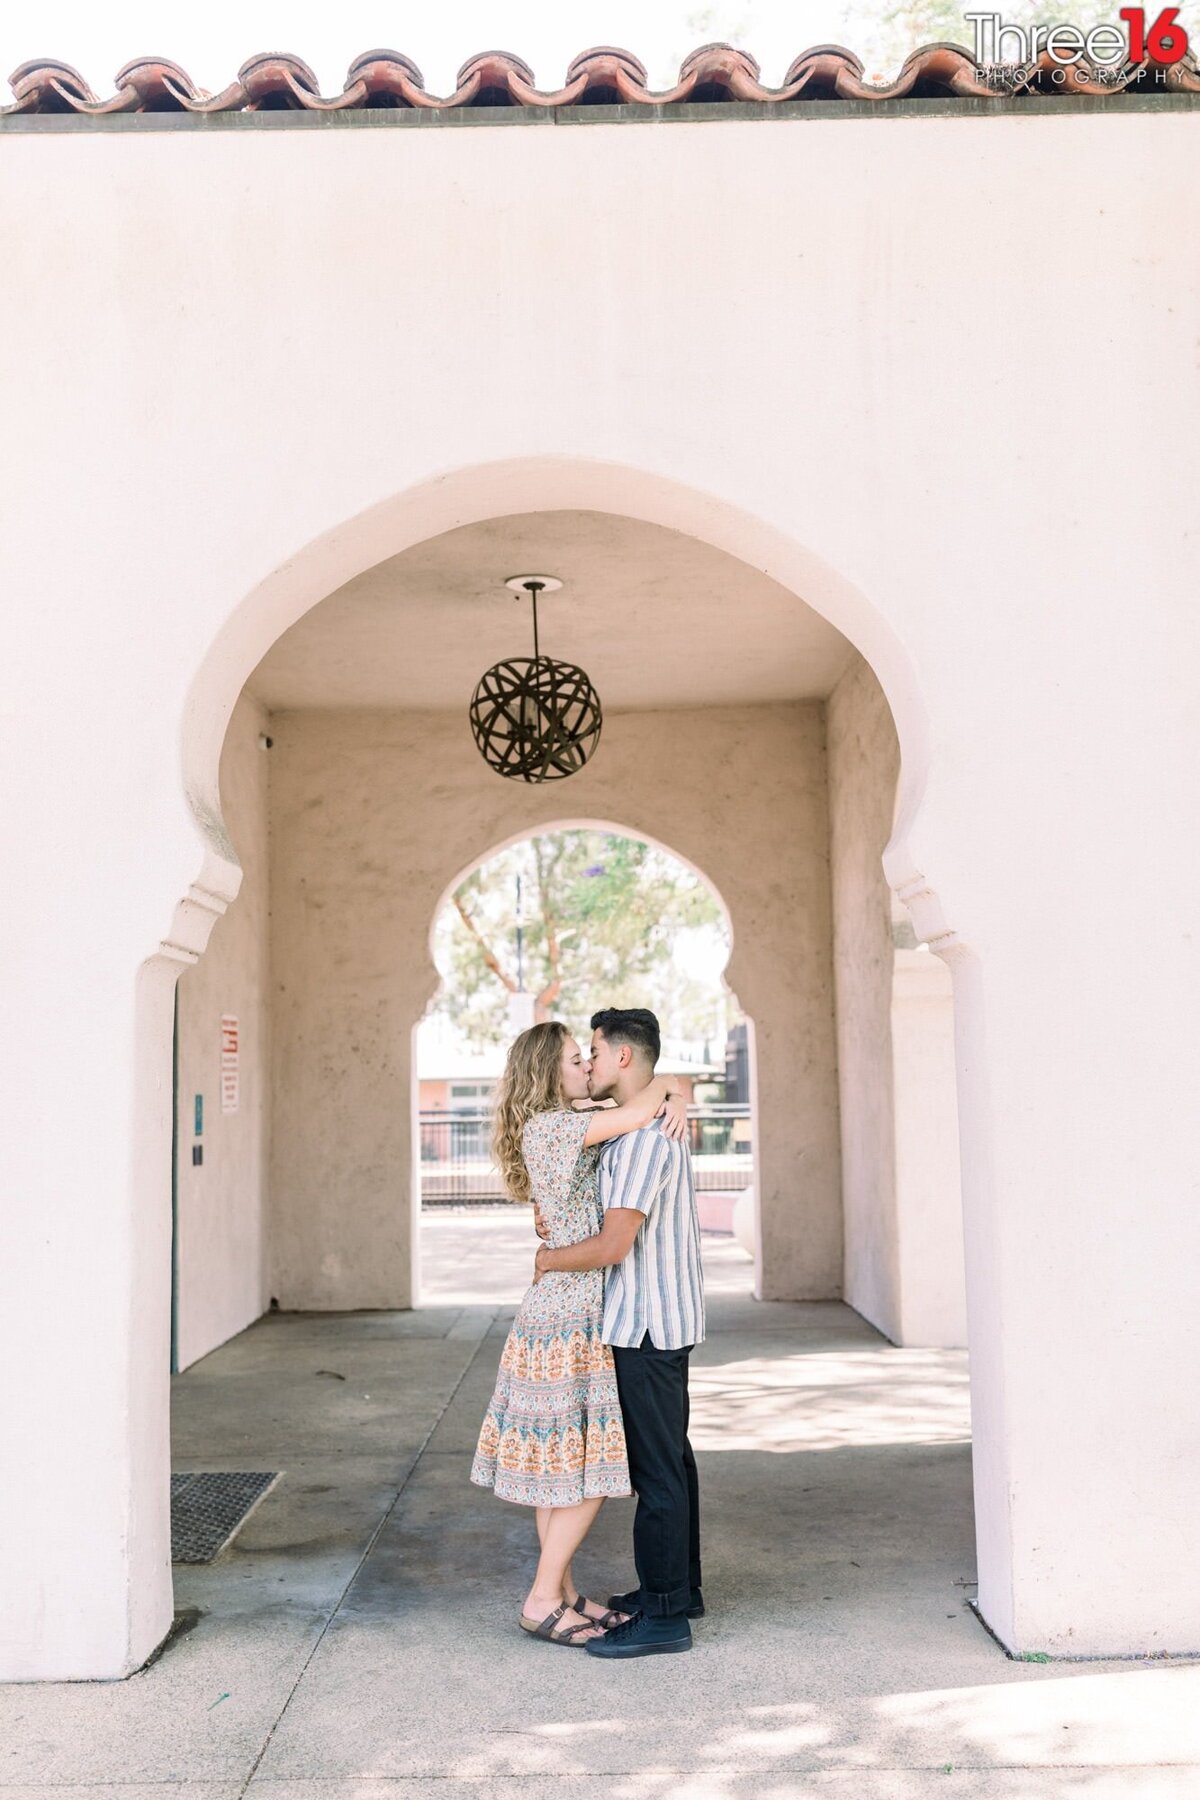 Future Bride and Groom share a romantic kiss under the archway at the Claremont Train Station